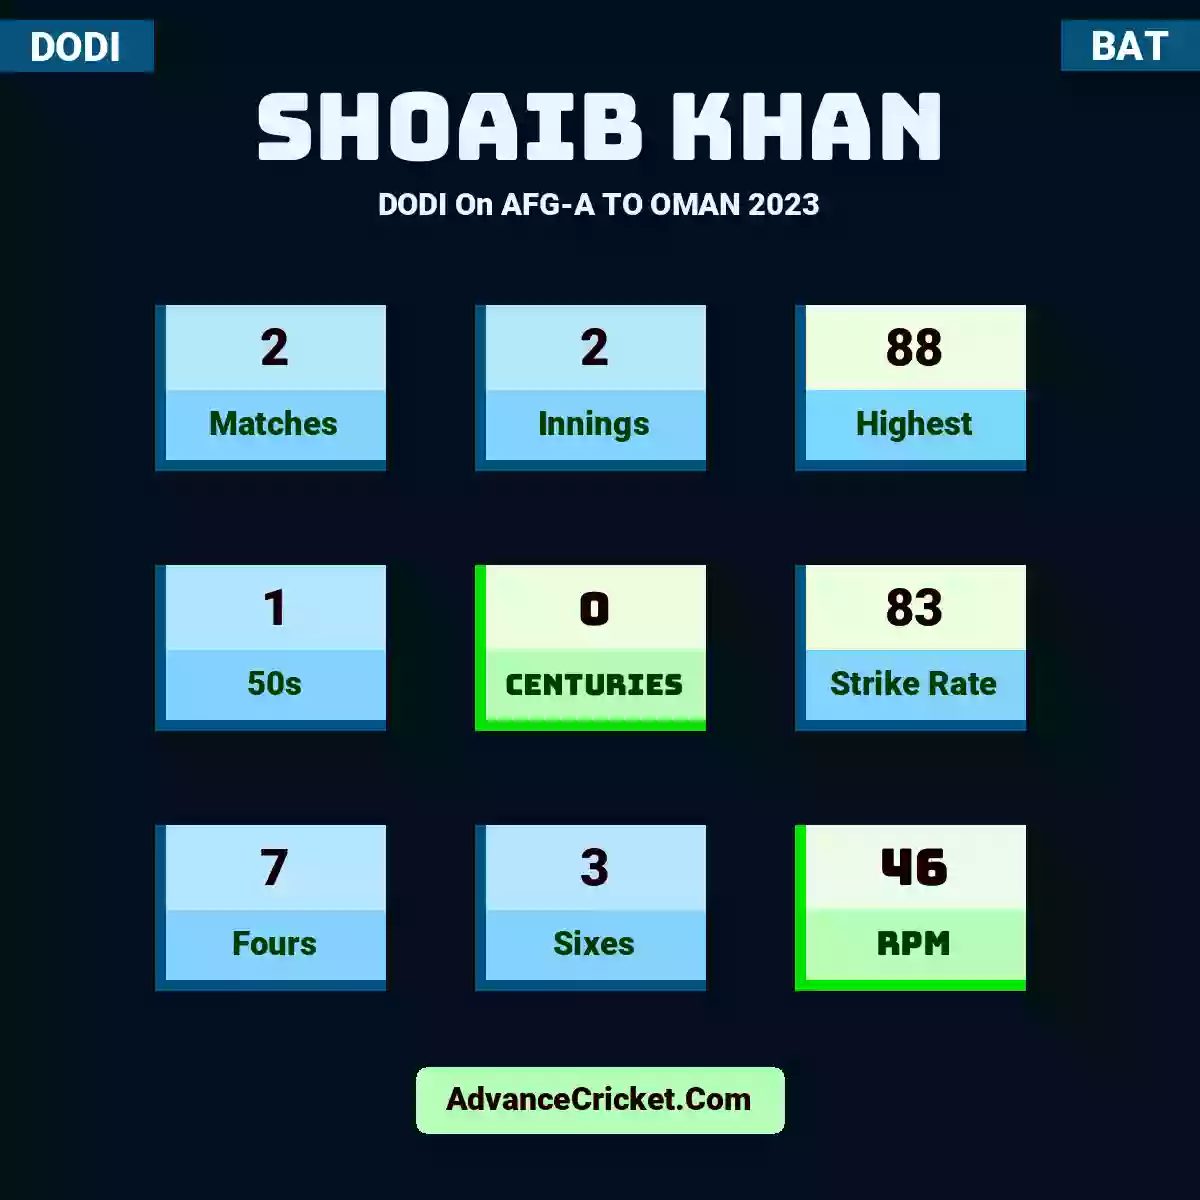 Shoaib Khan DODI  On AFG-A TO OMAN 2023, Shoaib Khan played 2 matches, scored 88 runs as highest, 1 half-centuries, and 0 centuries, with a strike rate of 83. s.khan hit 7 fours and 3 sixes, with an RPM of 46.